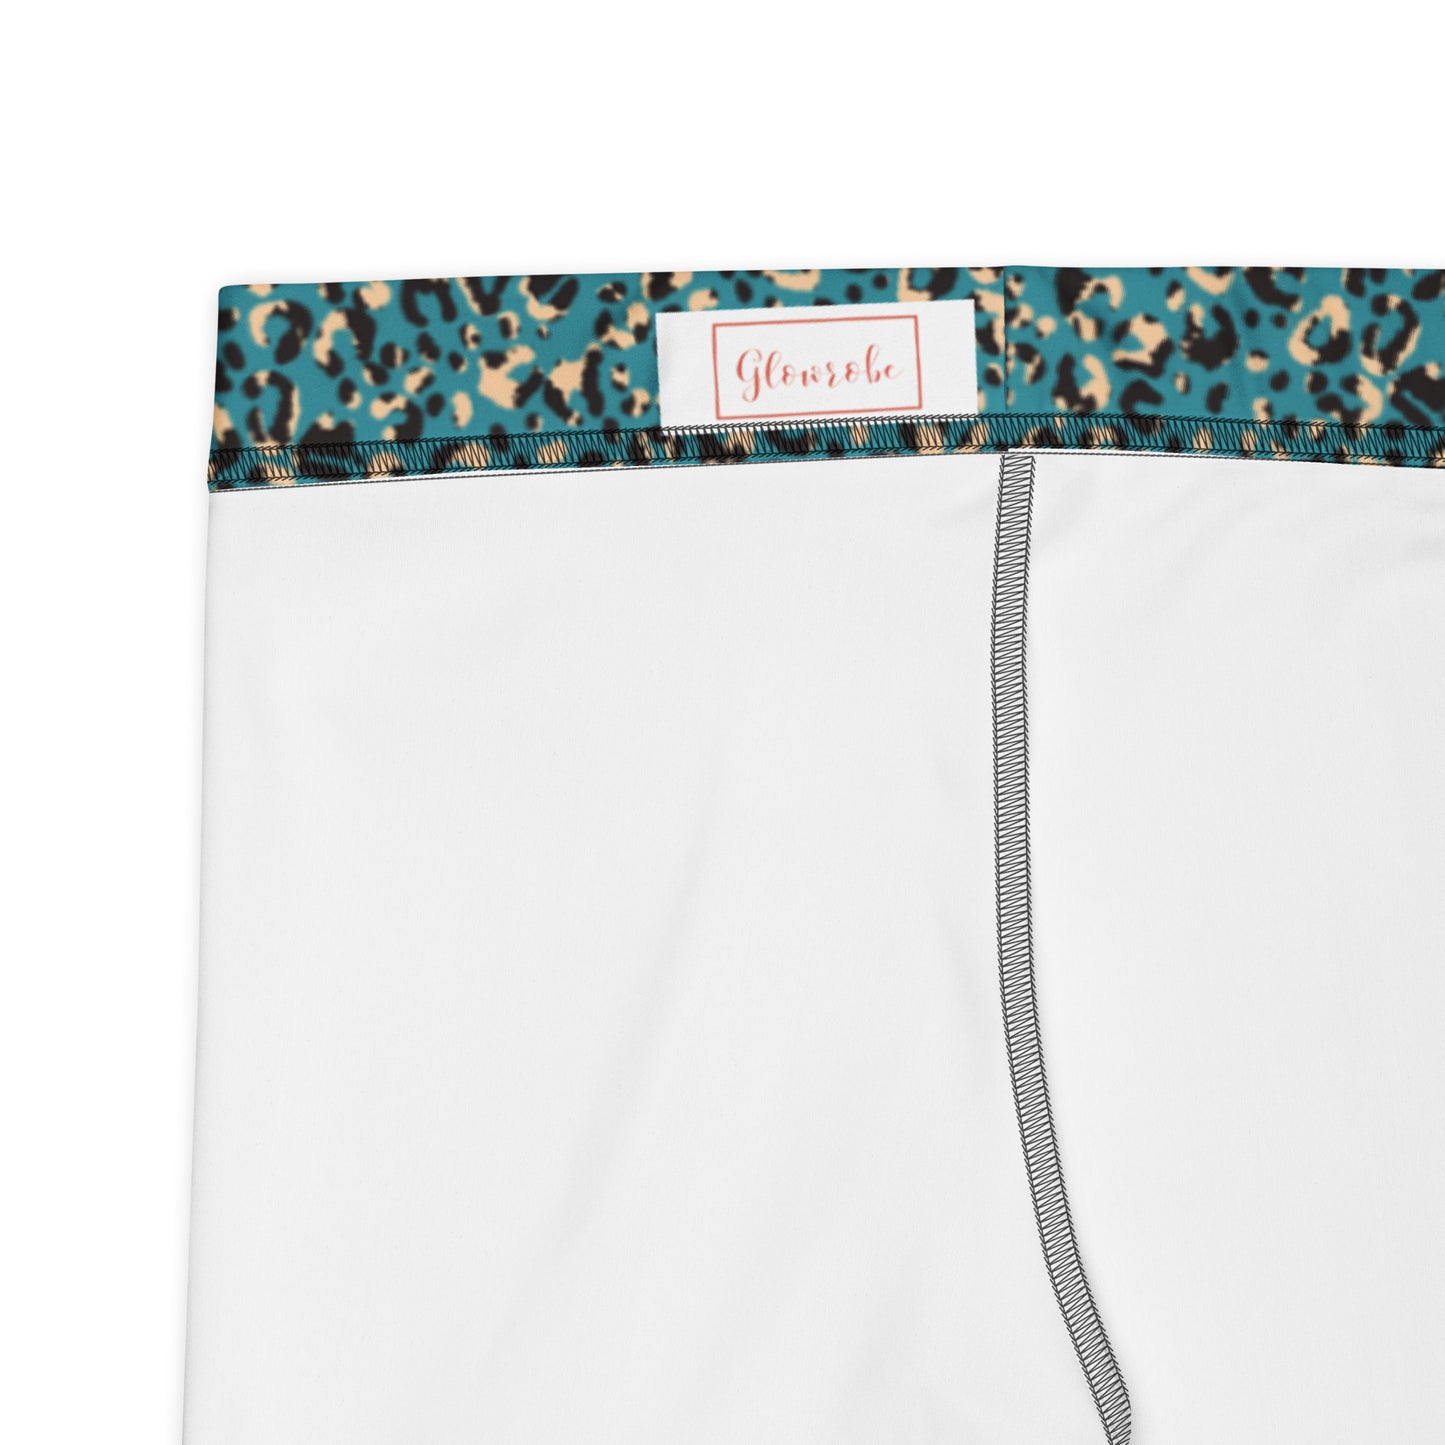 Wild Whiskers Mid-Rise Shorts